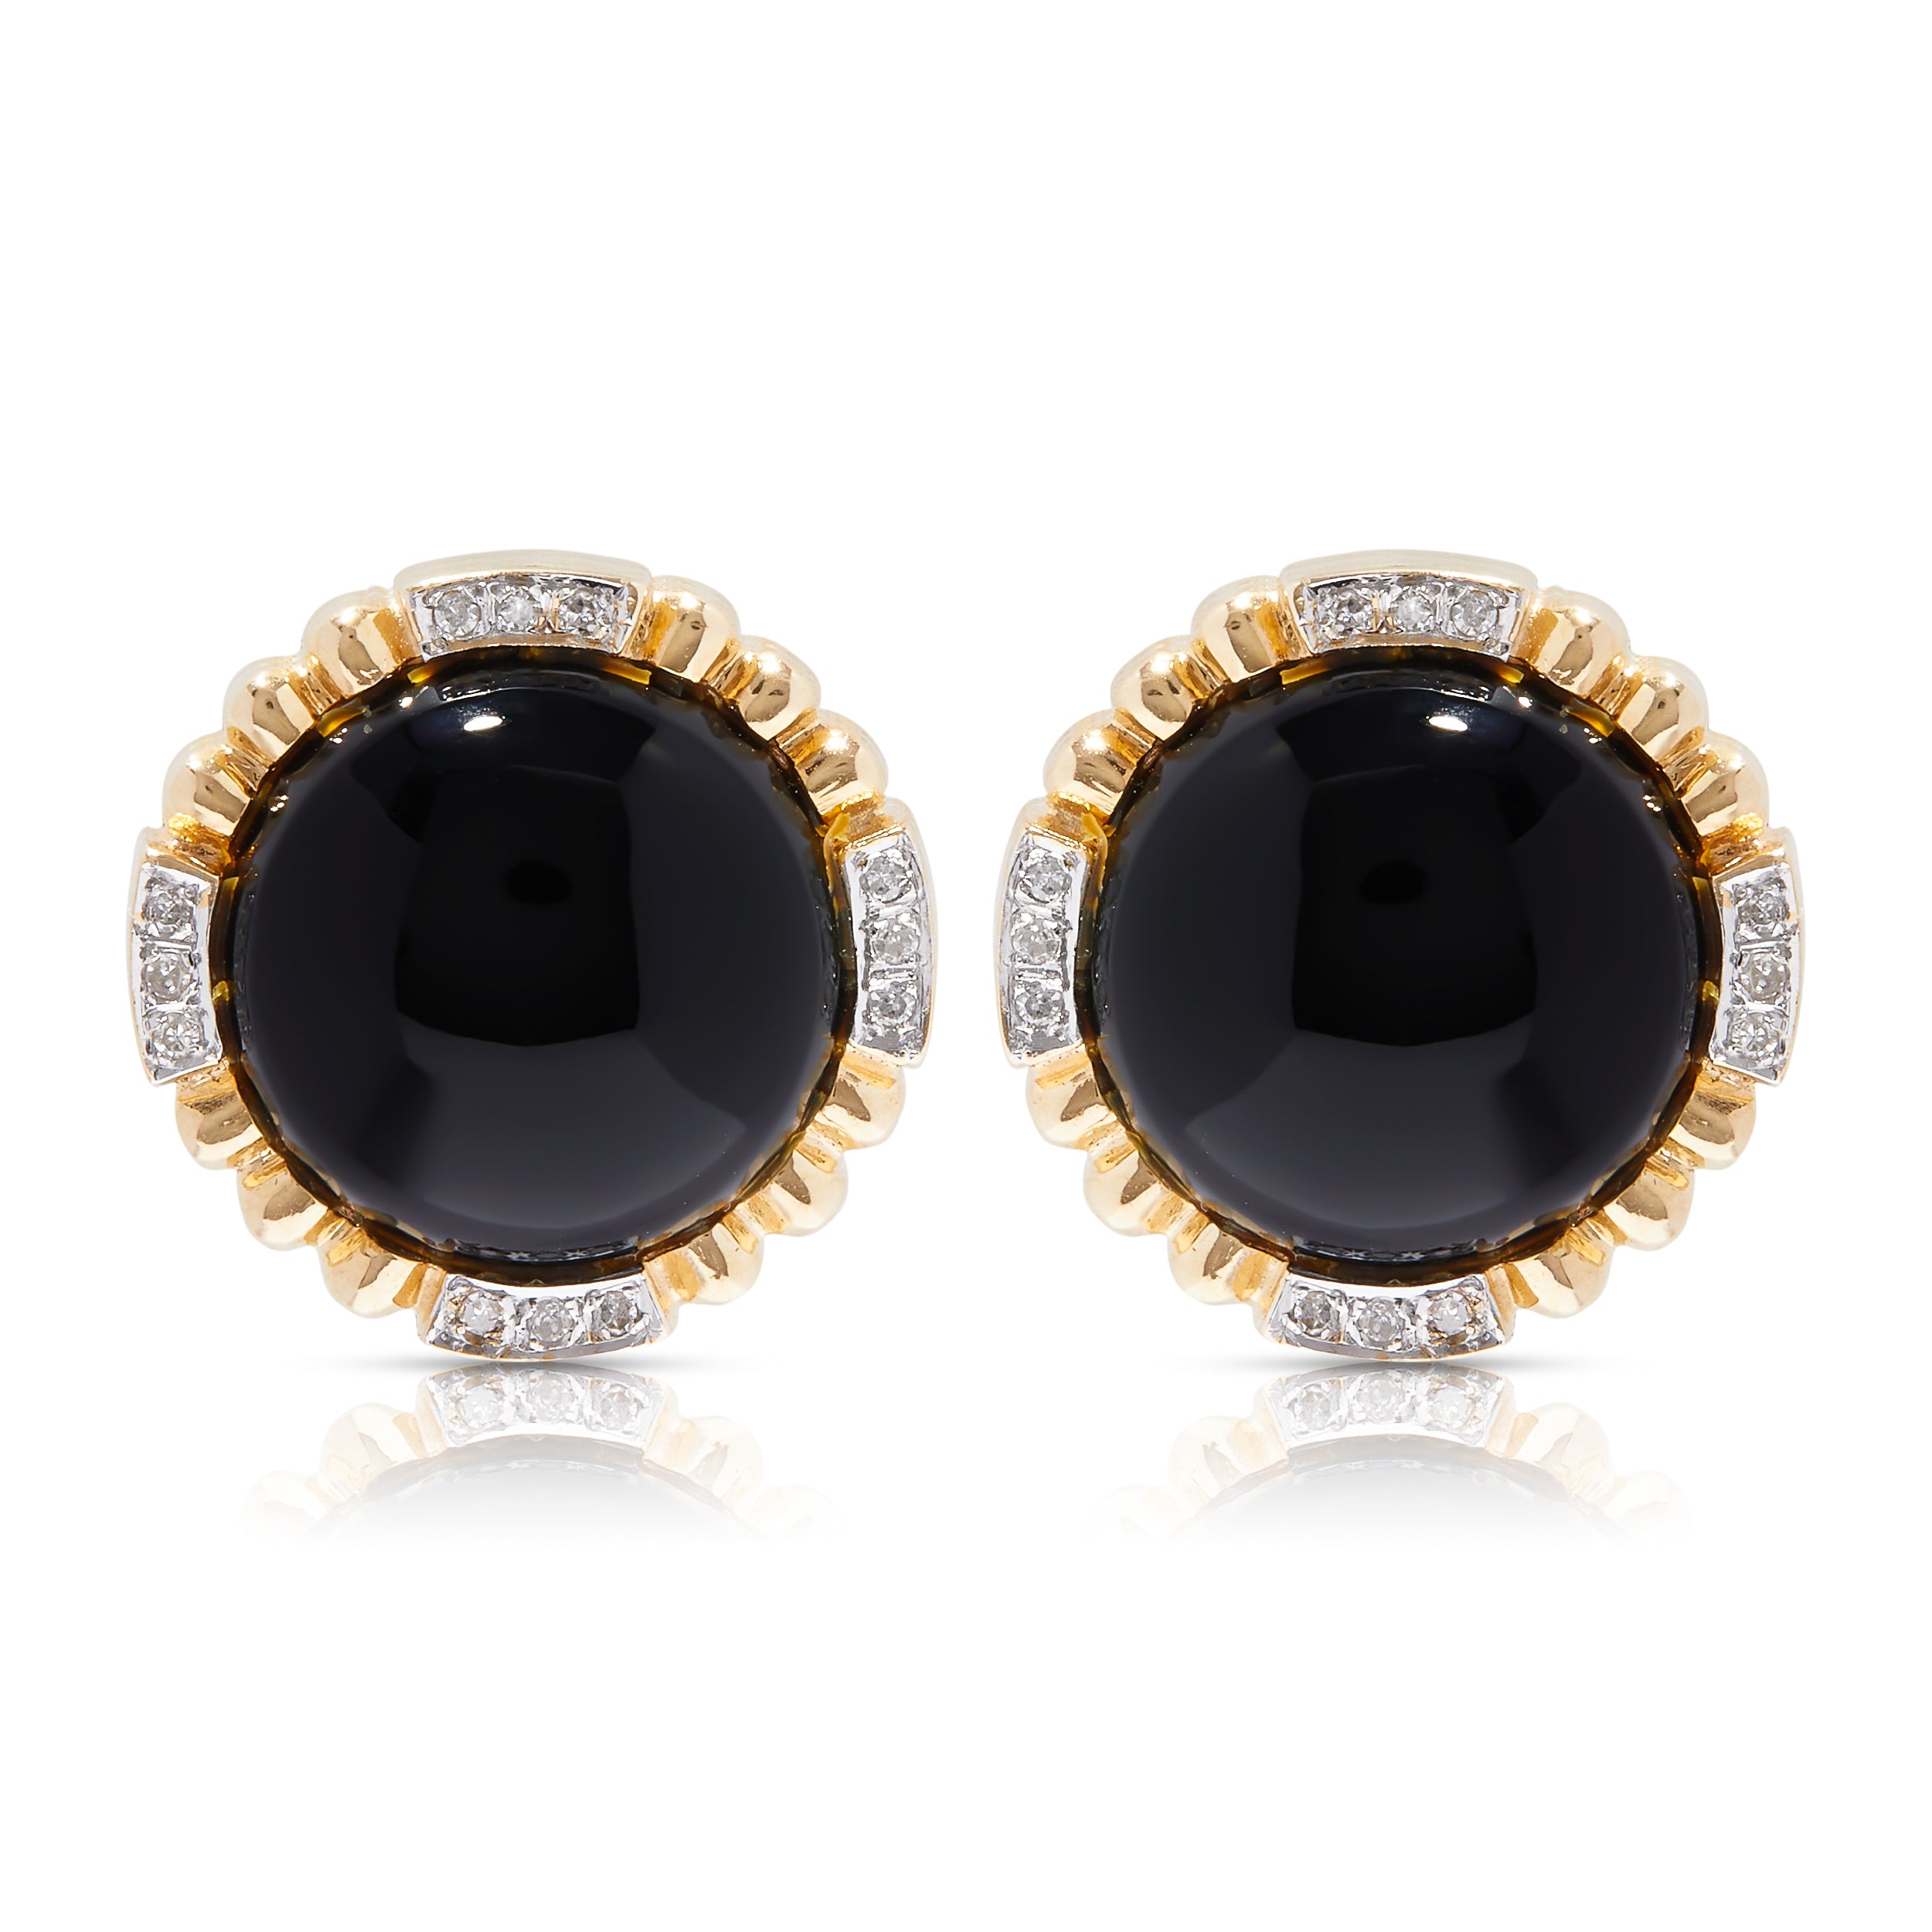 Vintage button earrings with black glass in 14ct gold and diamond frame.